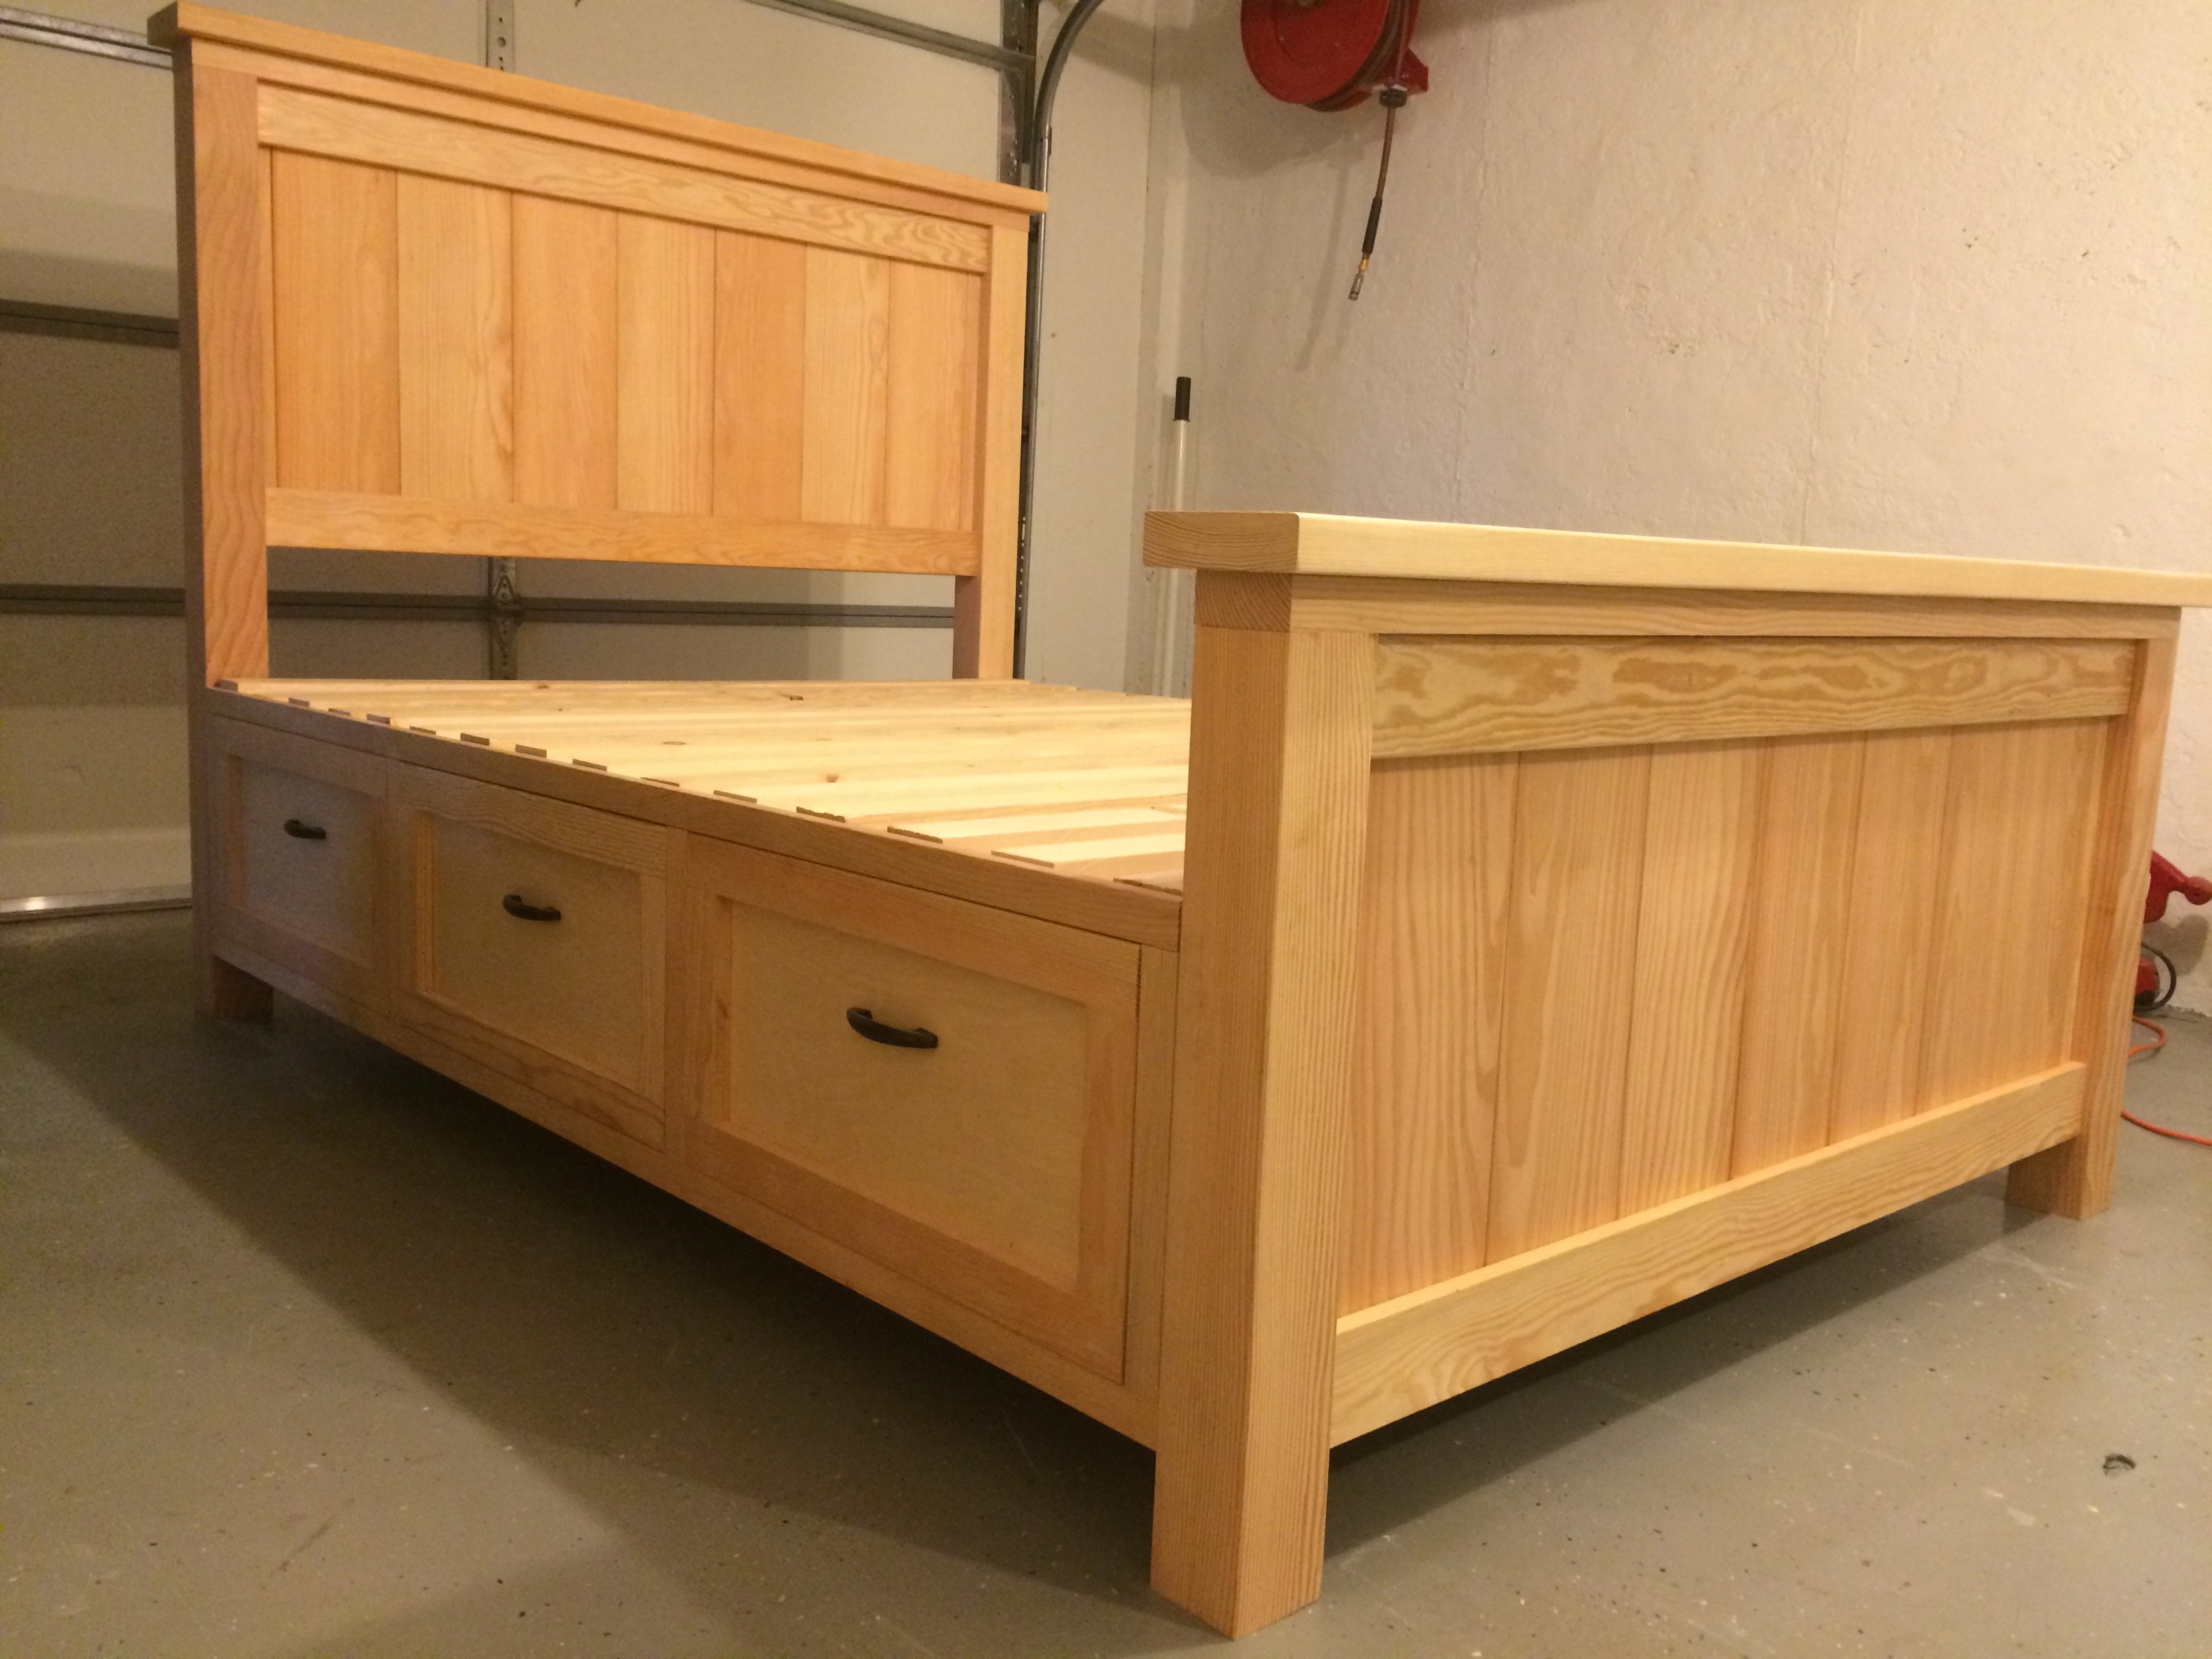 Farmhouse Storage Bed With Drawers, Queen Size Platform Bed With Drawers Plans